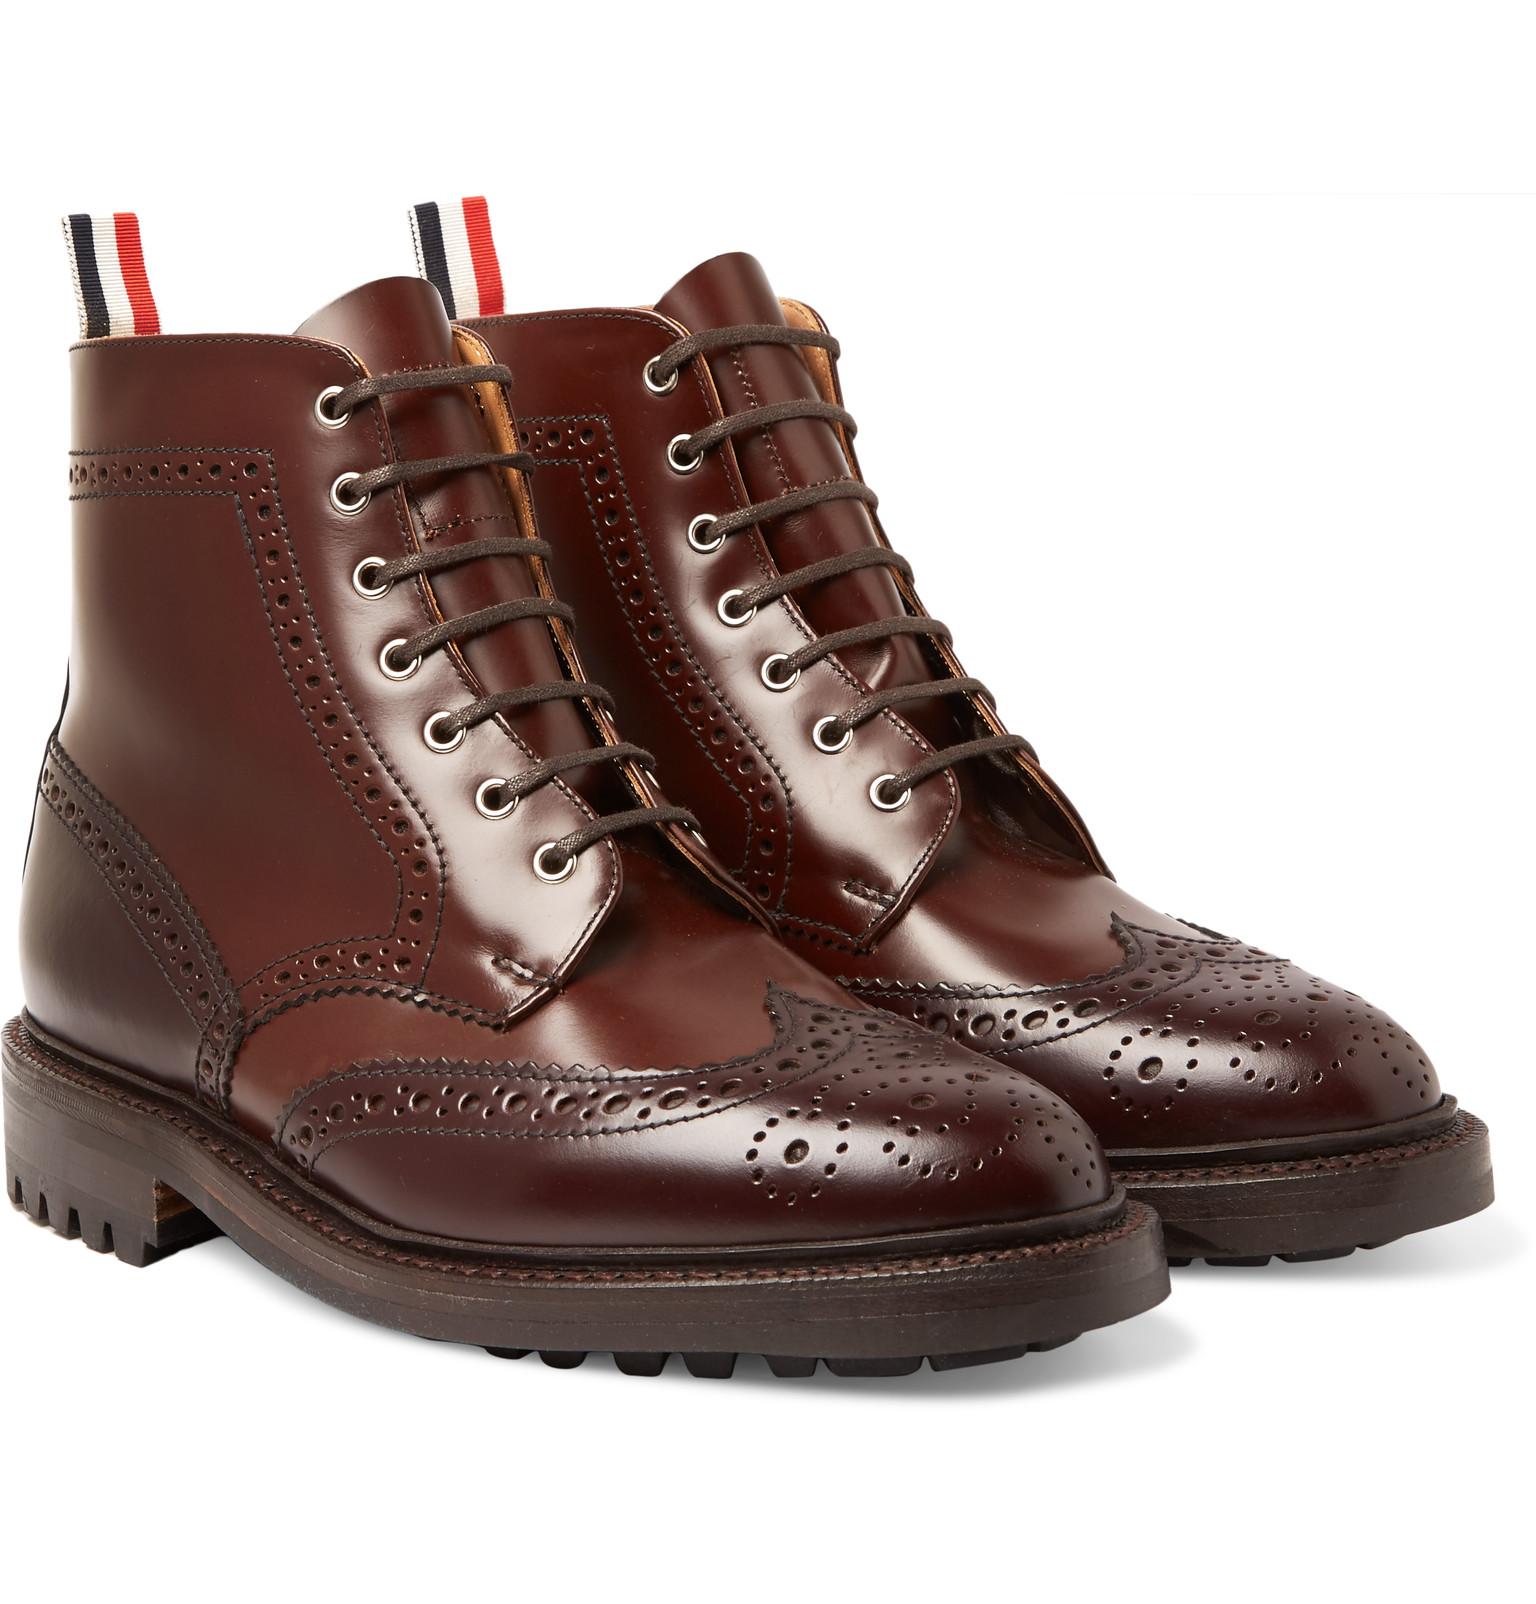 Lyst - Thom Browne Leather Classic Wingtip Boots in Brown